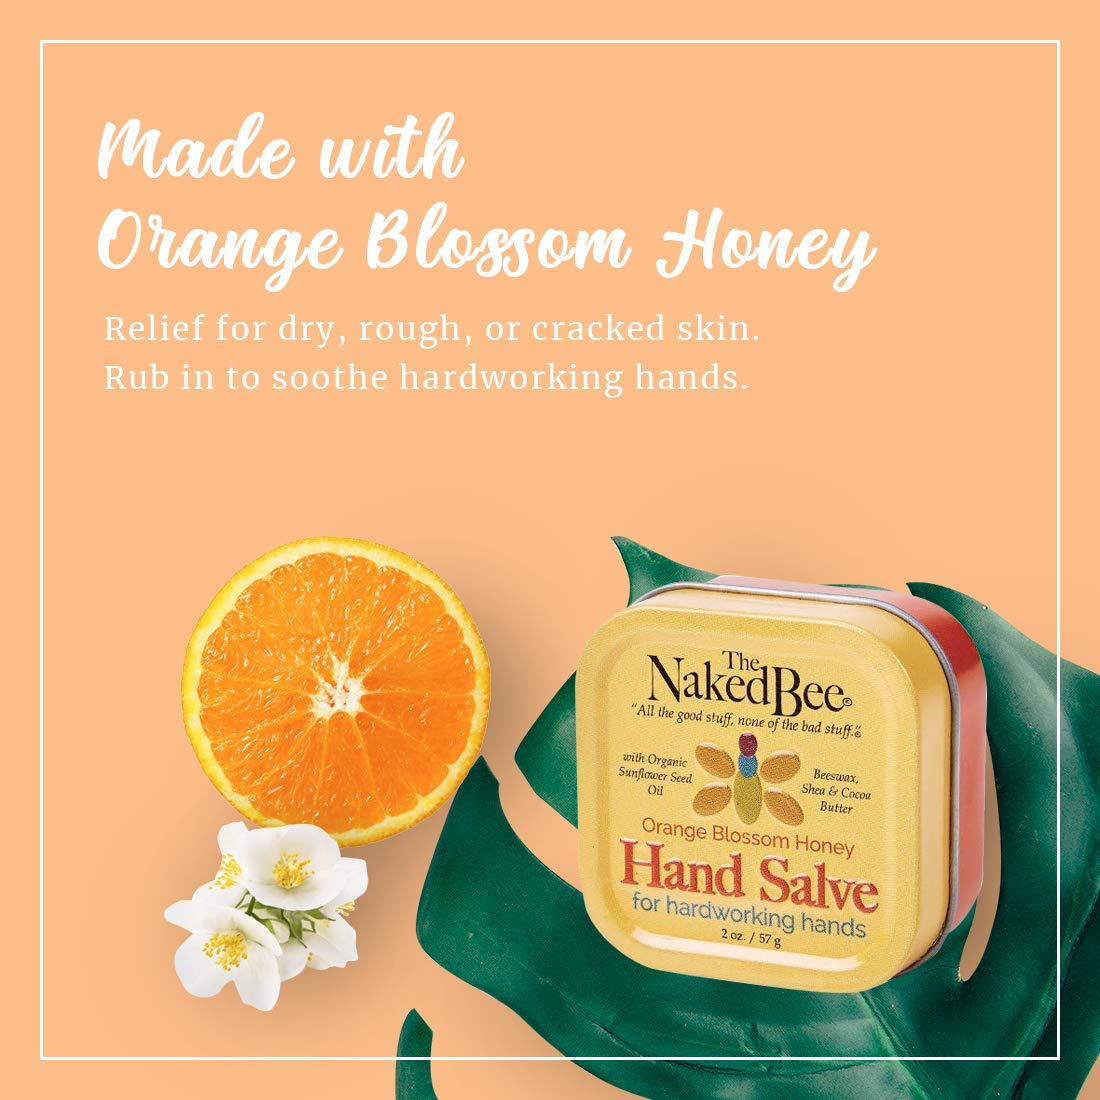 Relief for dry, rough, or cracked skin. Rub in to soothe hardworking hands. Experience the soothing essence of orange blossom and honey in these nourishing creams and lotions, thoughtfully crafted for your skin's care and radiance.